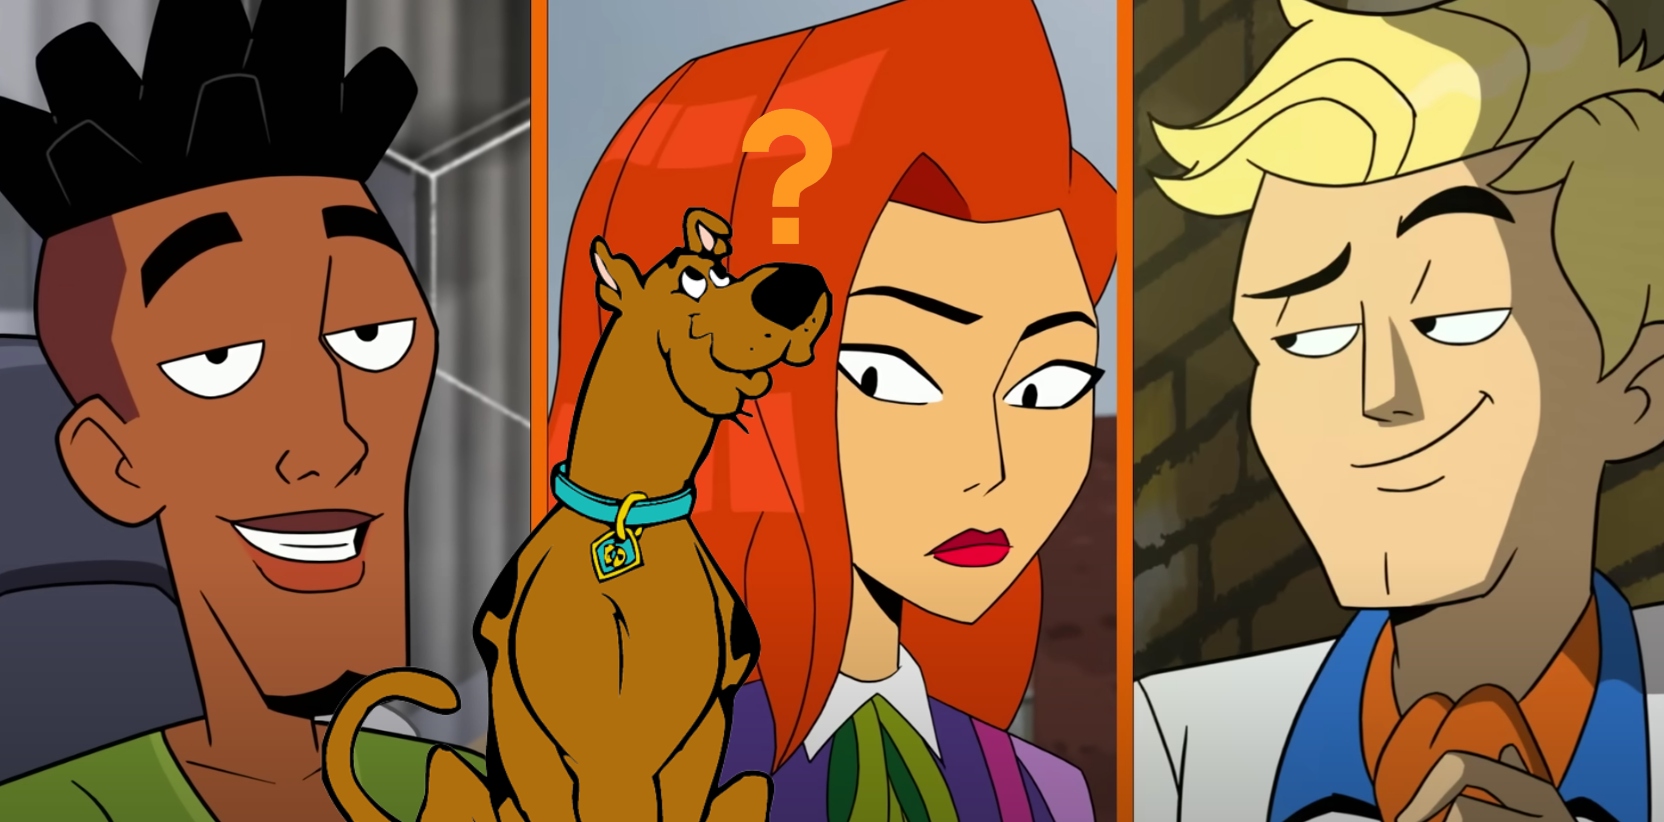 Shaggy, Daphne and Fred from 'Velma' overlapped by Scooby-Doo and an orange question mark